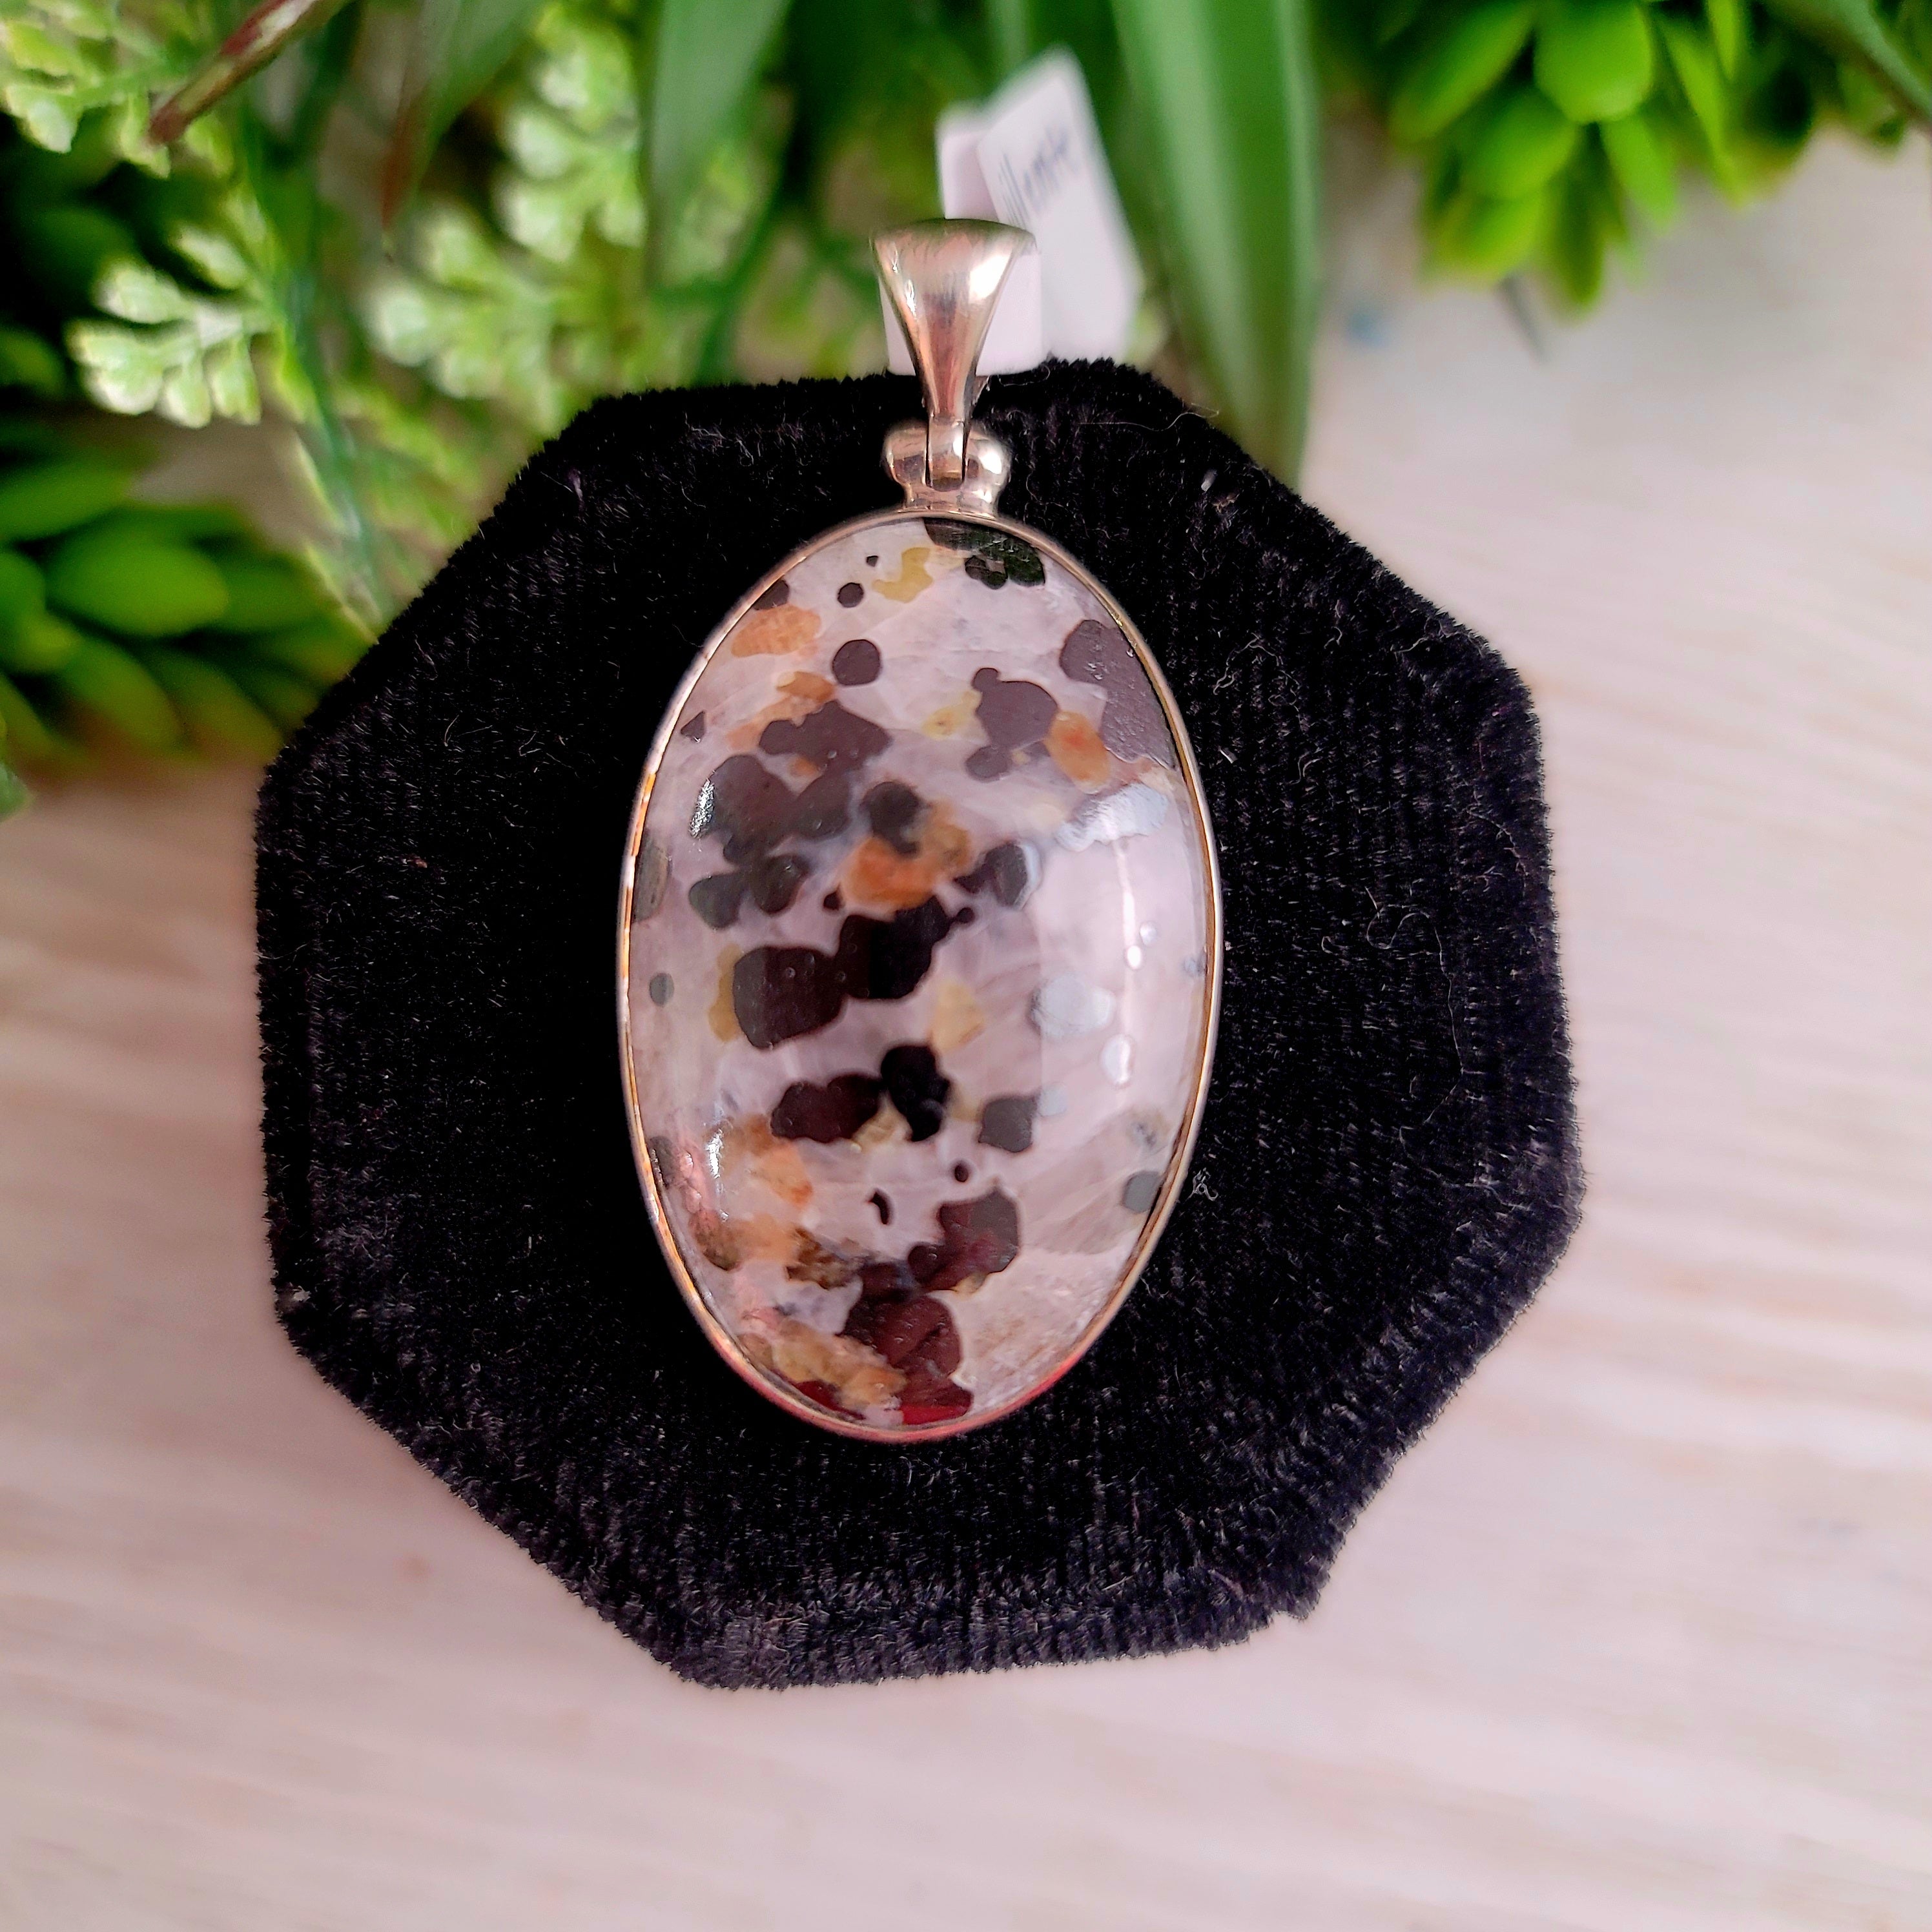 Willemite Pendant for Confidence, Intuition and Power